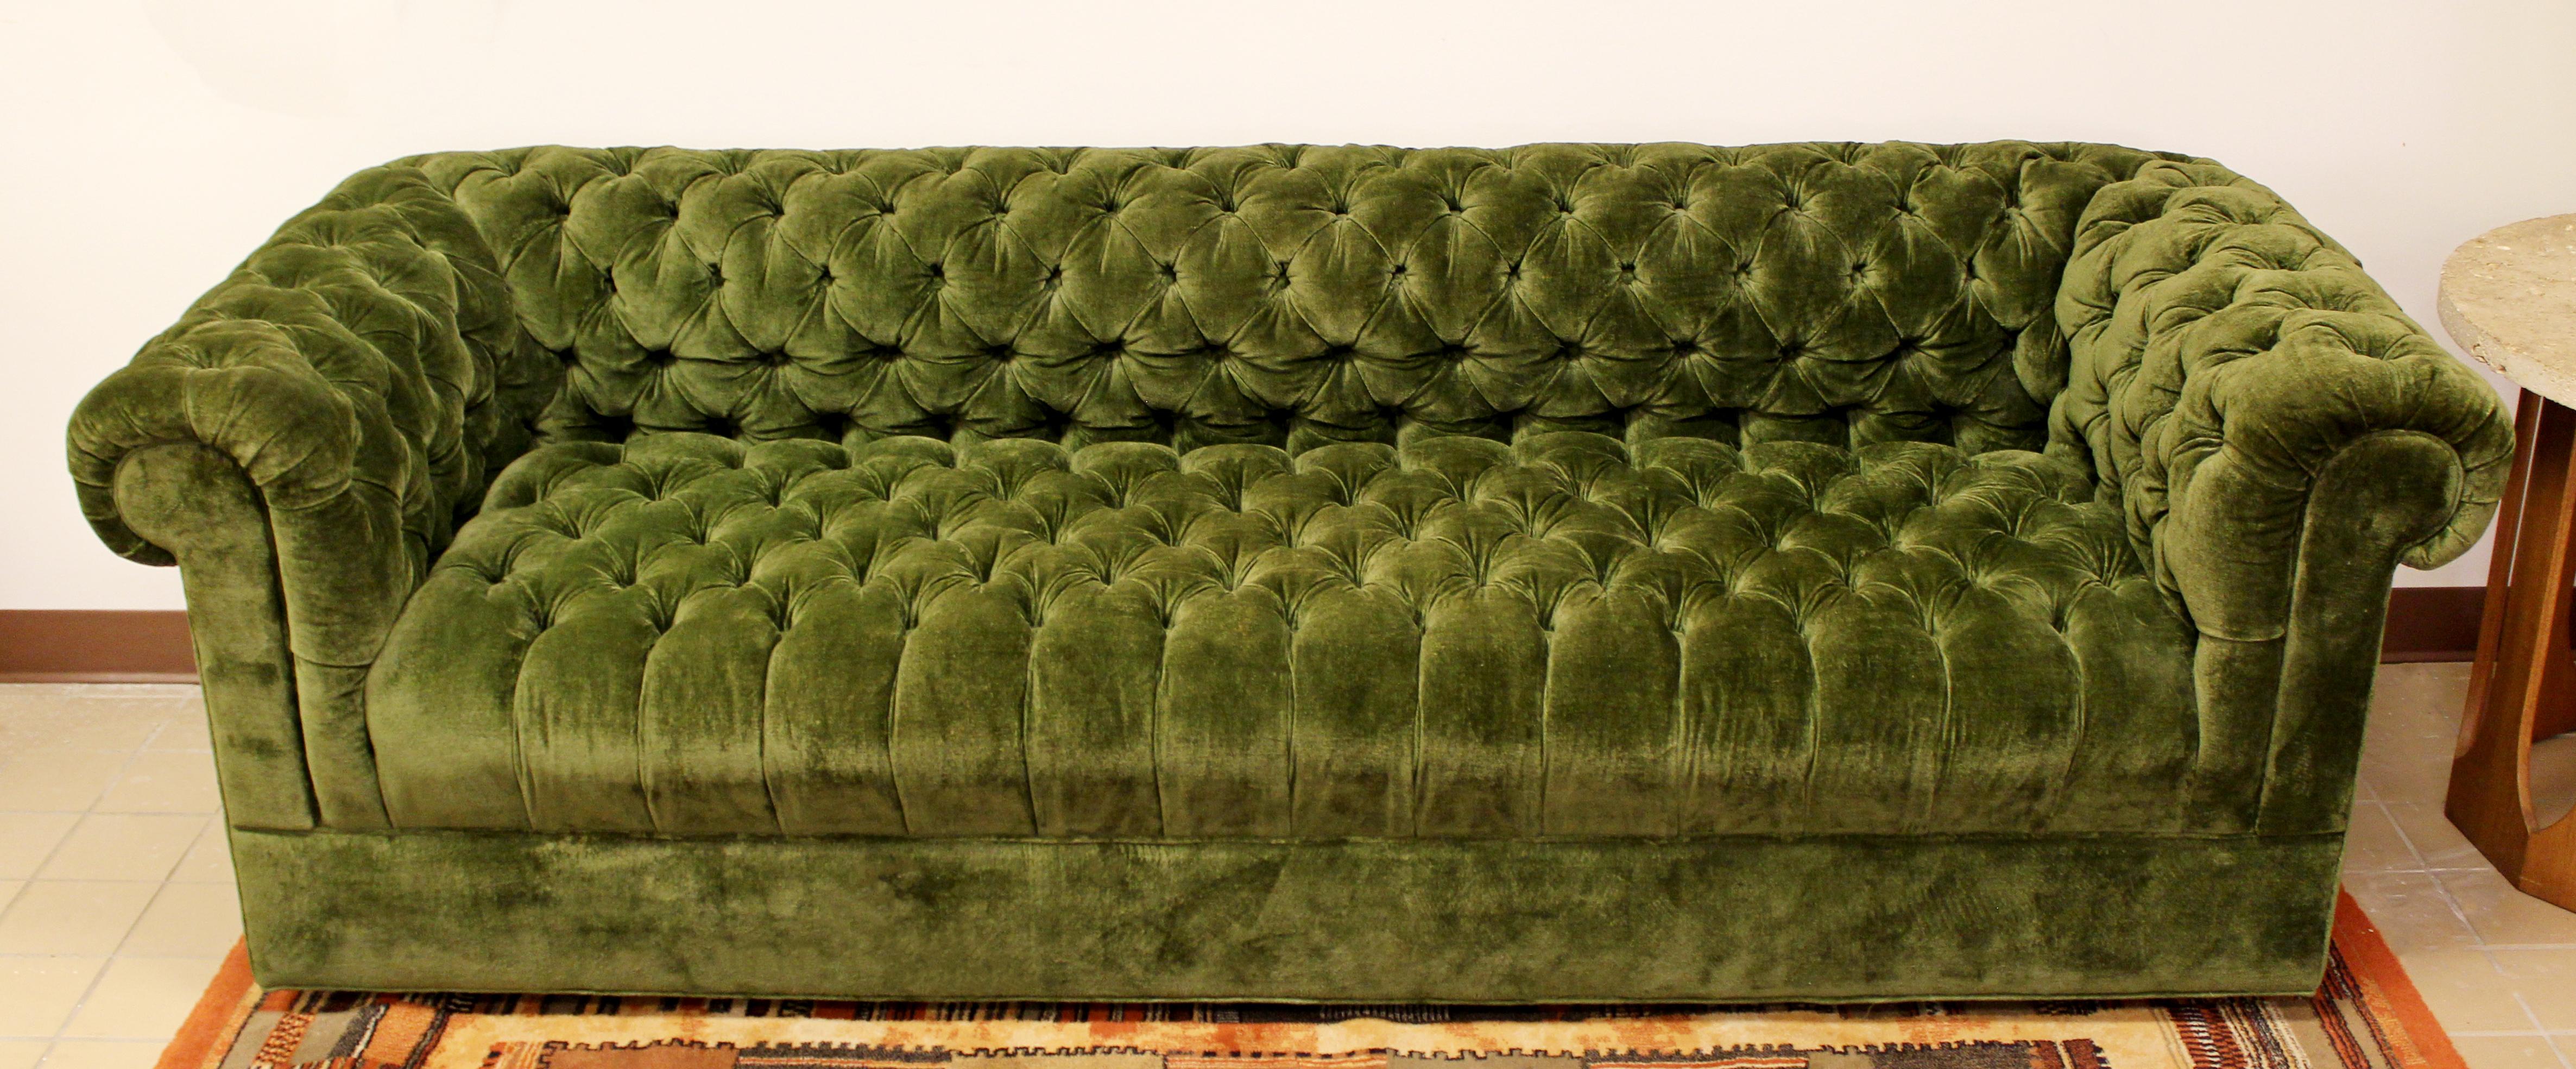 For your consideration is a fabulous, green, tufted sofa on casters, by Century, in the style of Milo Baughman, circa the 1960s. In excellent condition. The dimensions are 87